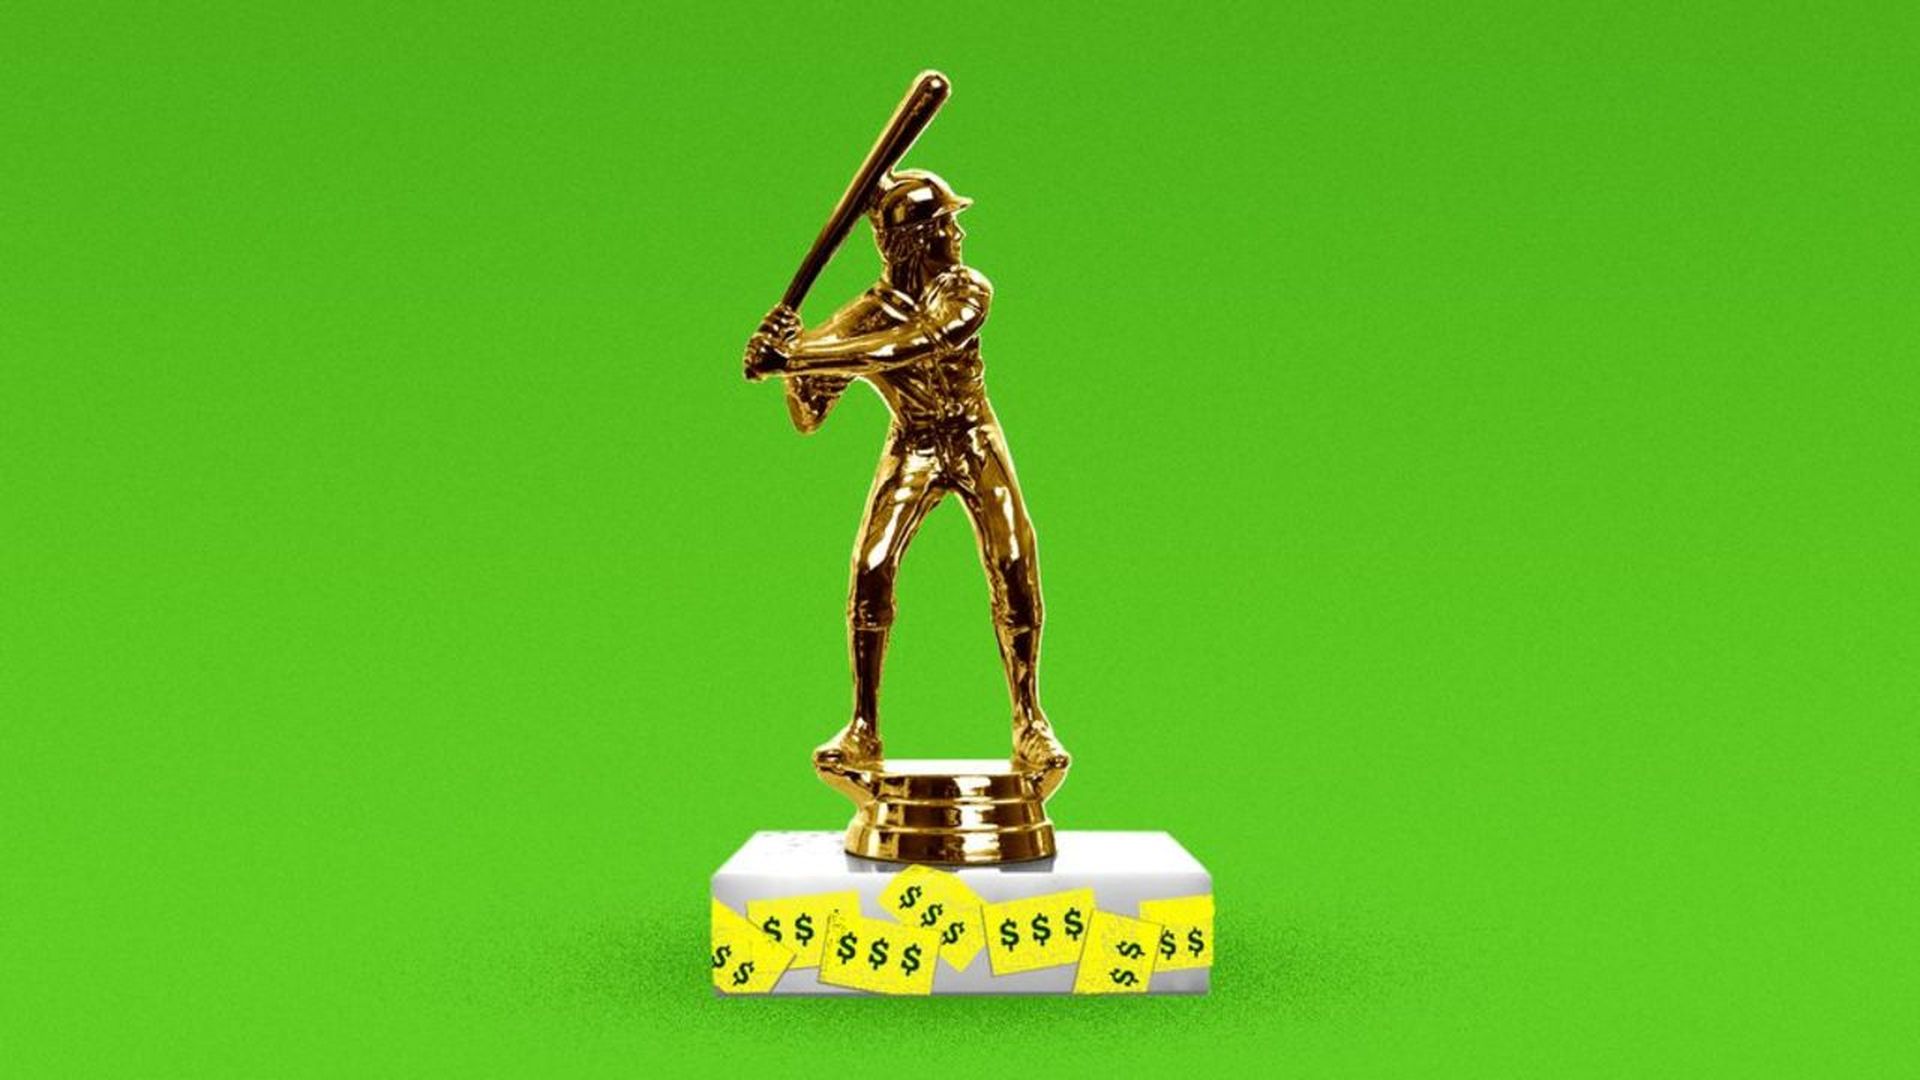 Illustration of a baseball trophy with money tags on it